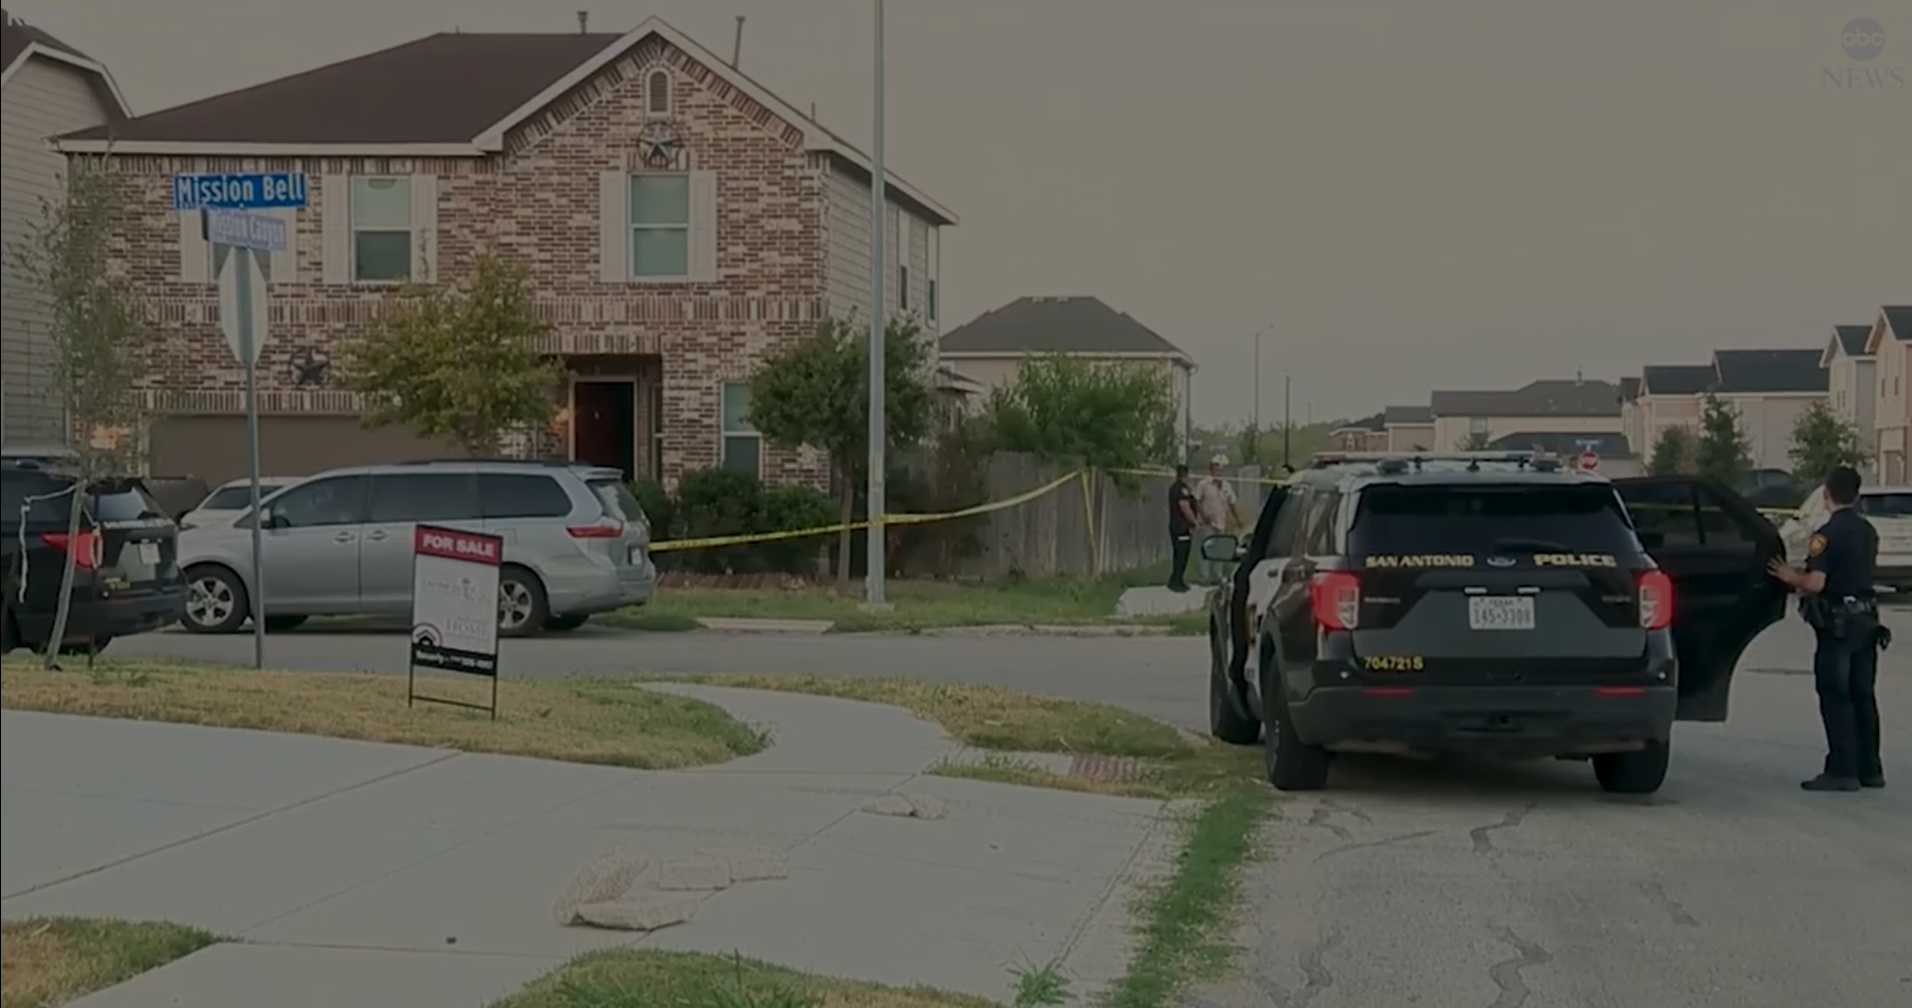 Five children, all under 17-years-old, were found in the home after police responded to the early morning call